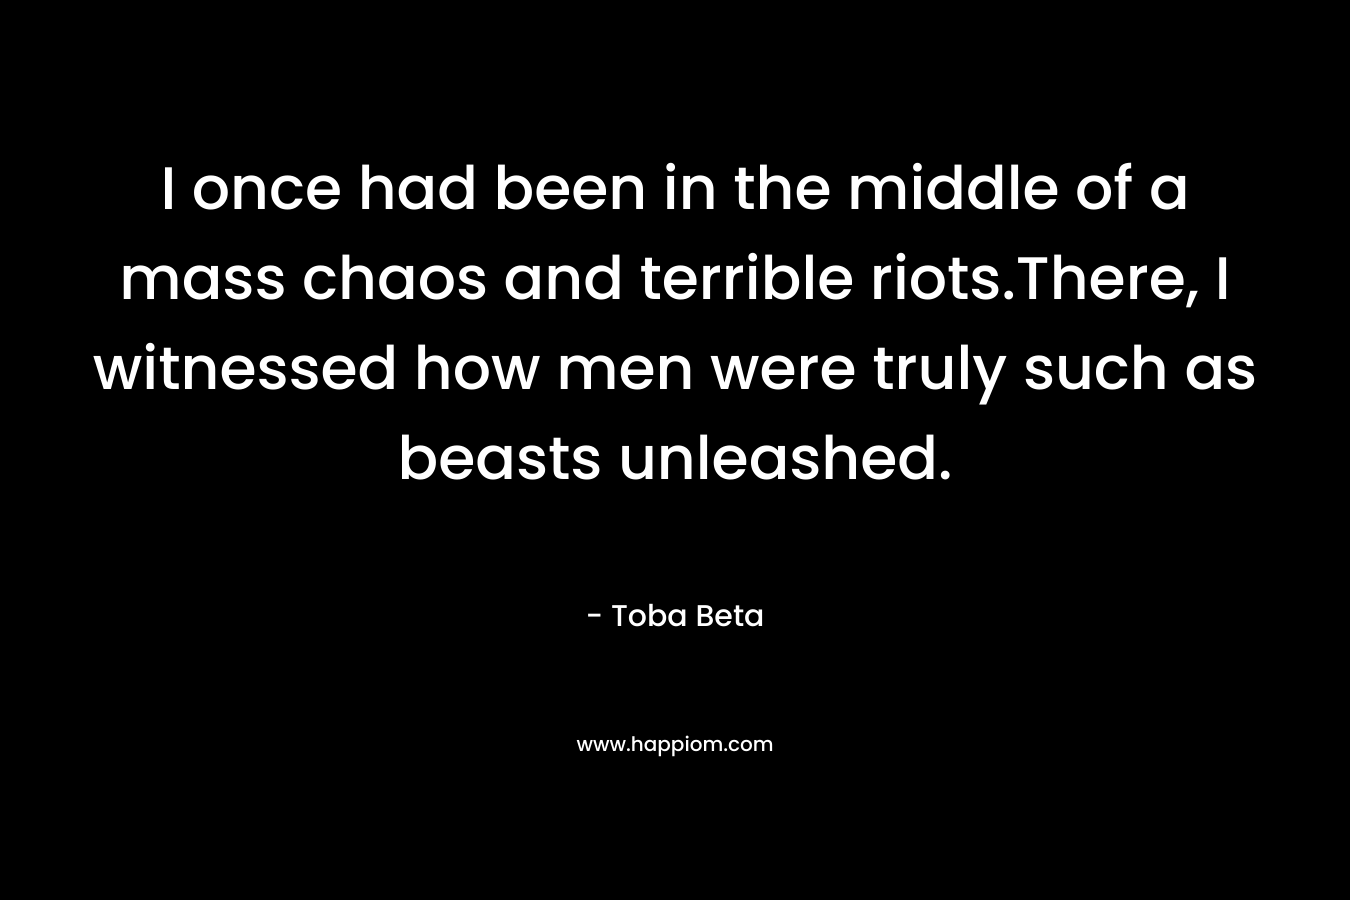 I once had been in the middle of a mass chaos and terrible riots.There, I witnessed how men were truly such as beasts unleashed. – Toba Beta